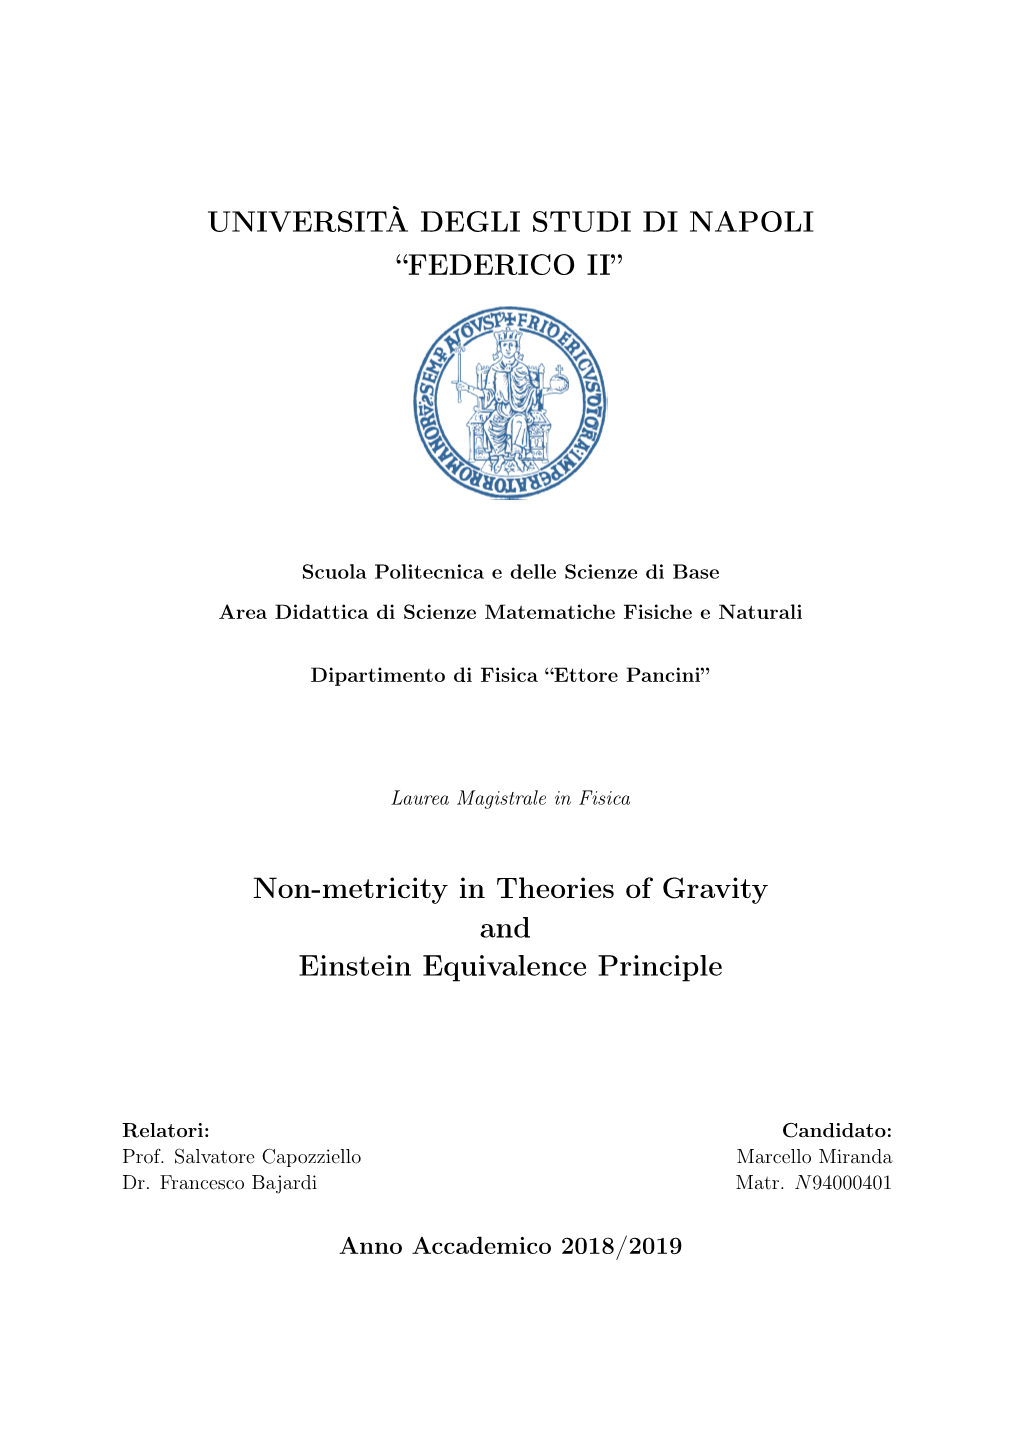 Non-Metricity in Theories of Gravity and Einstein Equivalence Principle